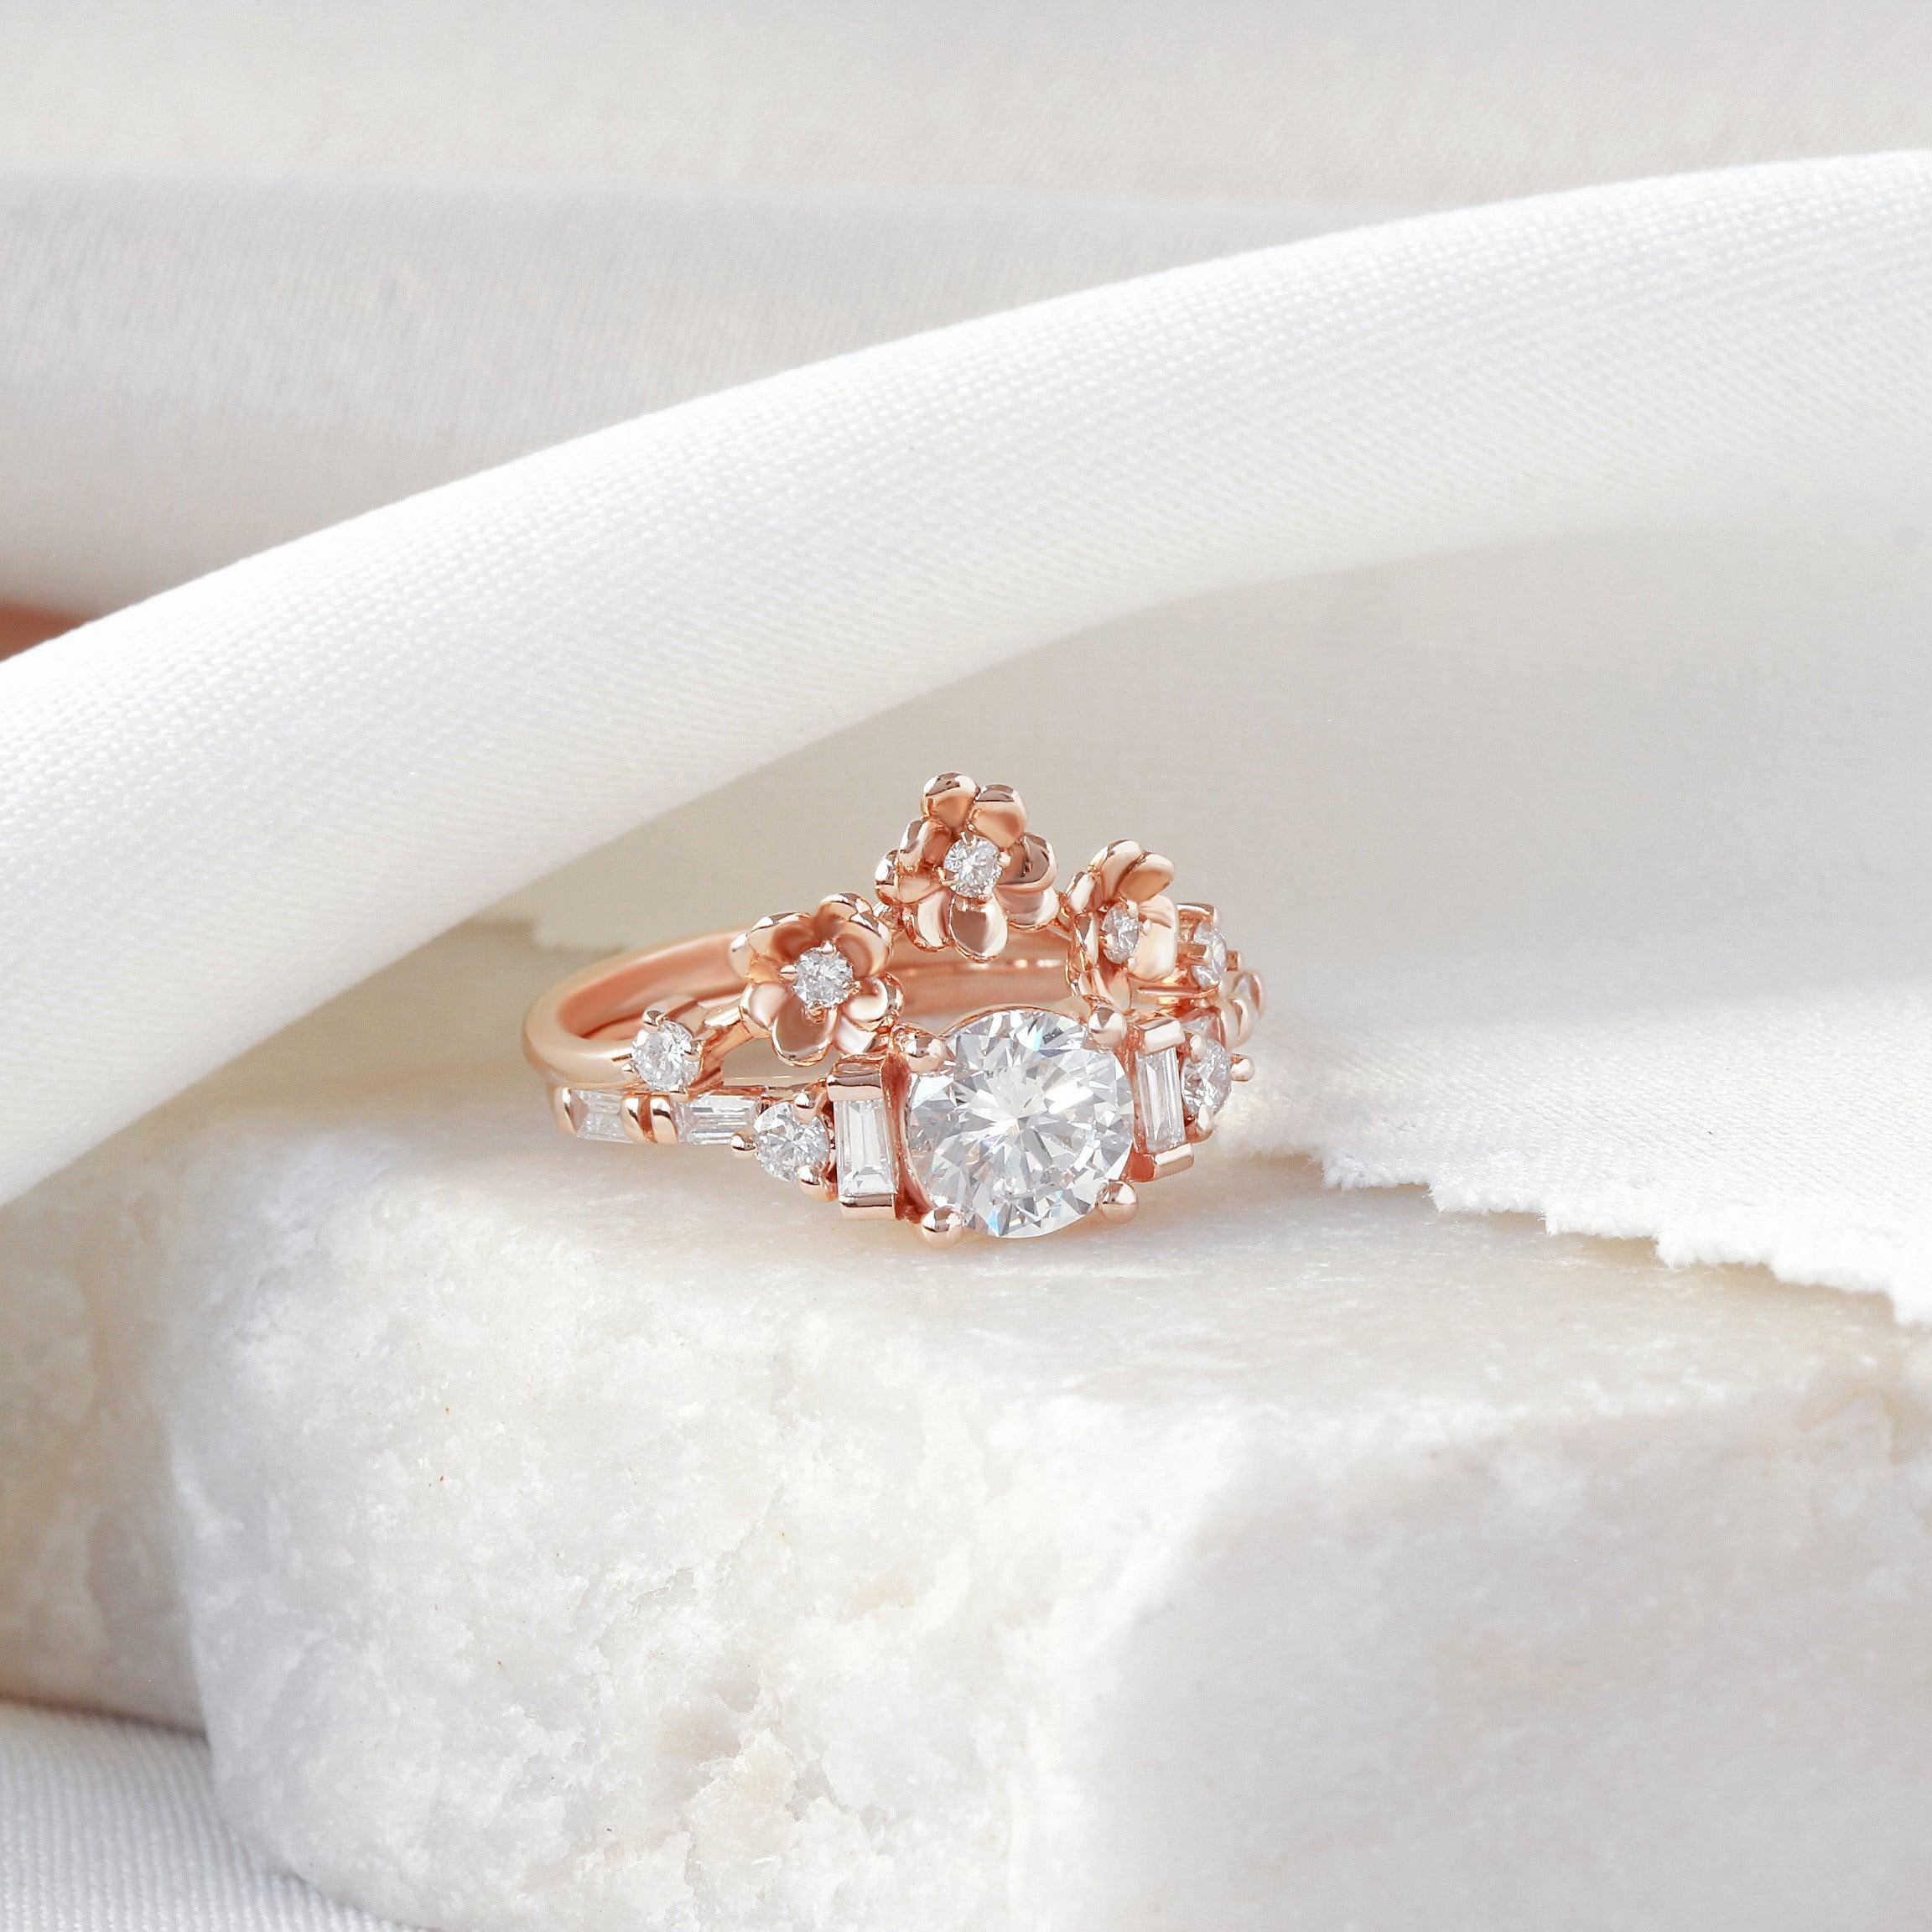 Beautiful and unique Engagement Ring with a Round Center stone and Baguette accent diamonds. The band is set with white baguette diamonds.
Handmade with love and care by Silly Shiny Diamonds.
READY TO SHIP!
The list is for the engagement ring